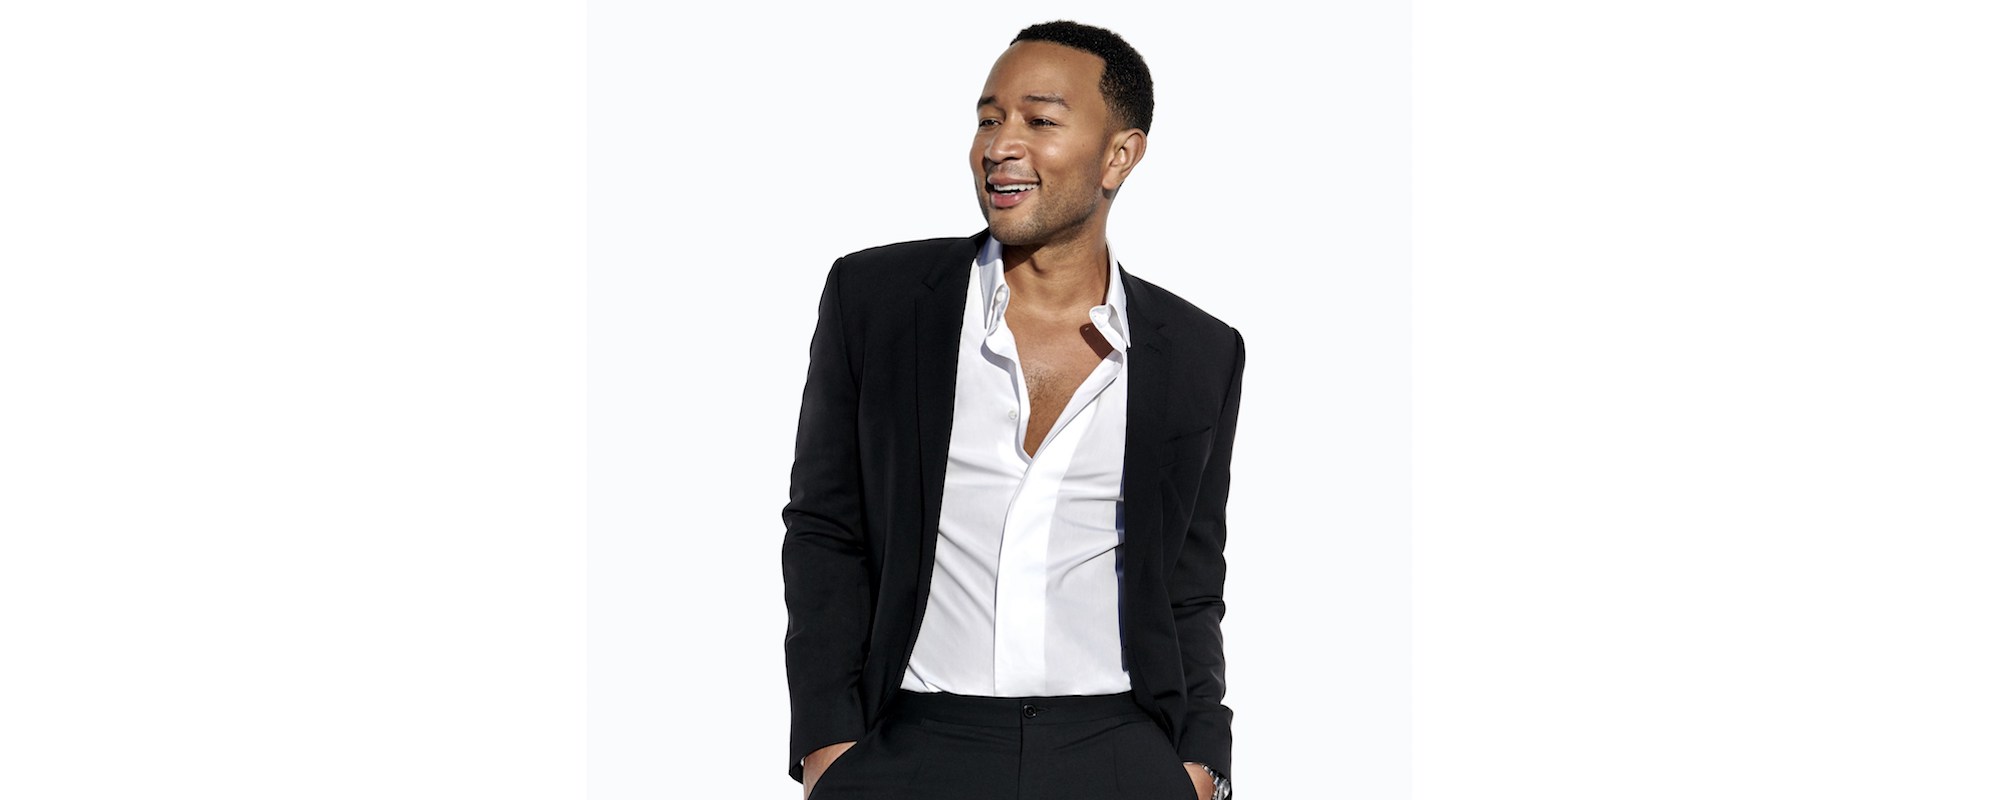 John Legend Says “It’s Not Radical to Dream of a More Free America” in Face of Roe v. Wade Buzz